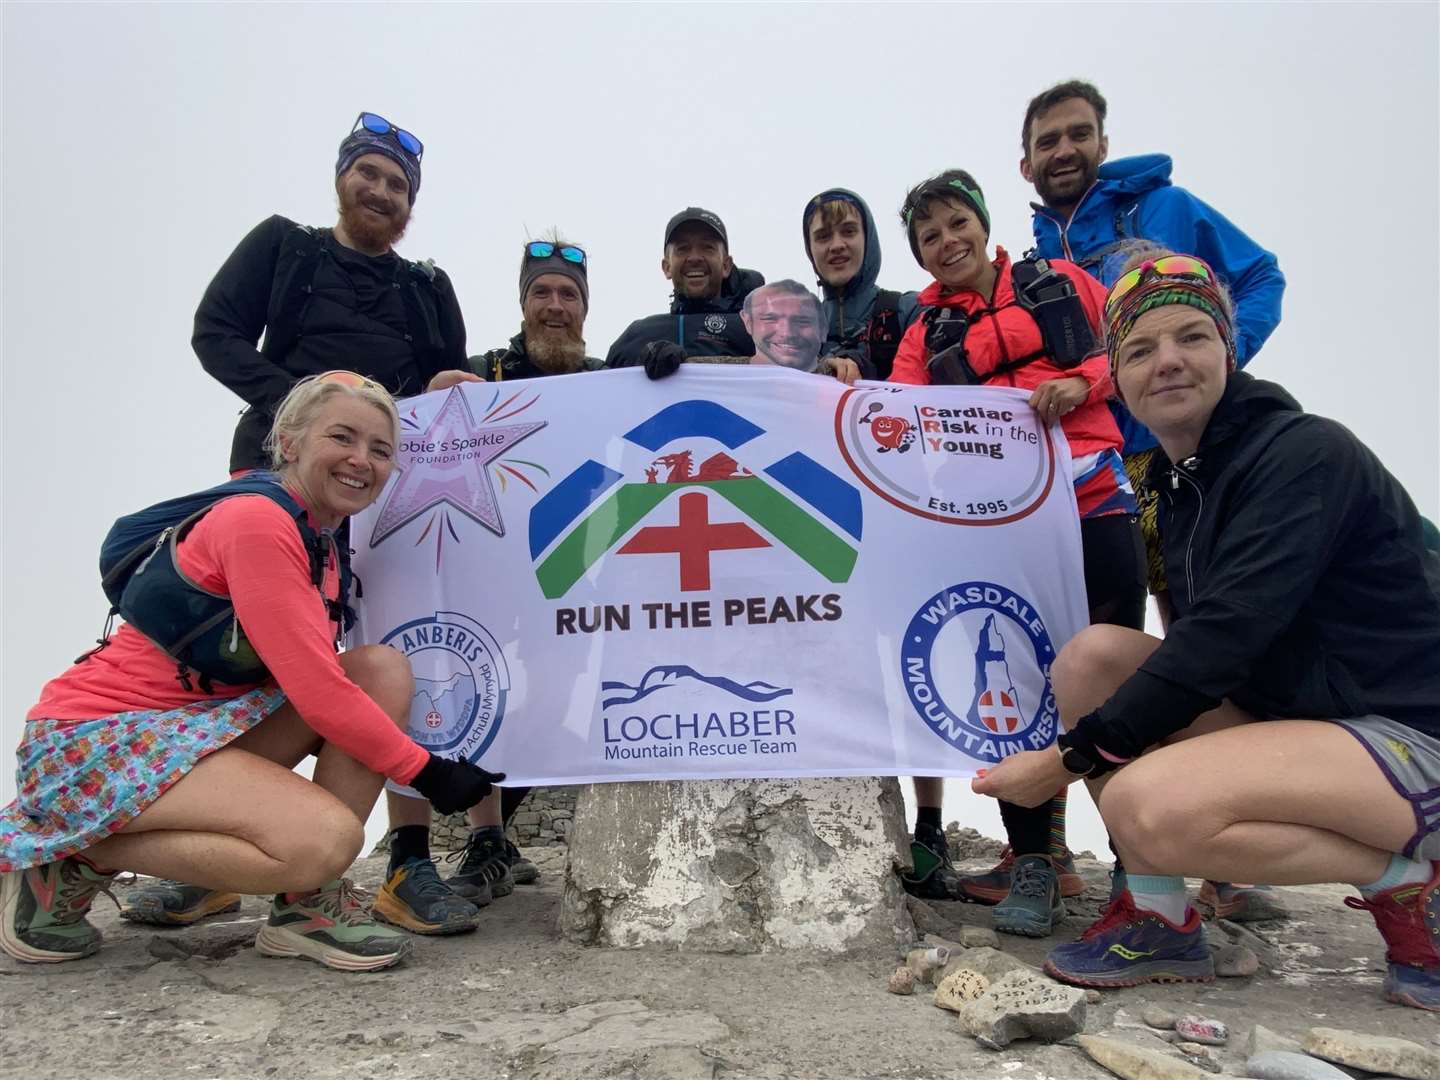 Team Run The Peaks Mike Munro (2nd left), Andy Bentley (4th left), Lori MacPherson (3rd right) and Jonny McAllister (2nd right) were accompanied by friends for the final climb at Ben Nevis which marked the end point of their mammoth challenge.